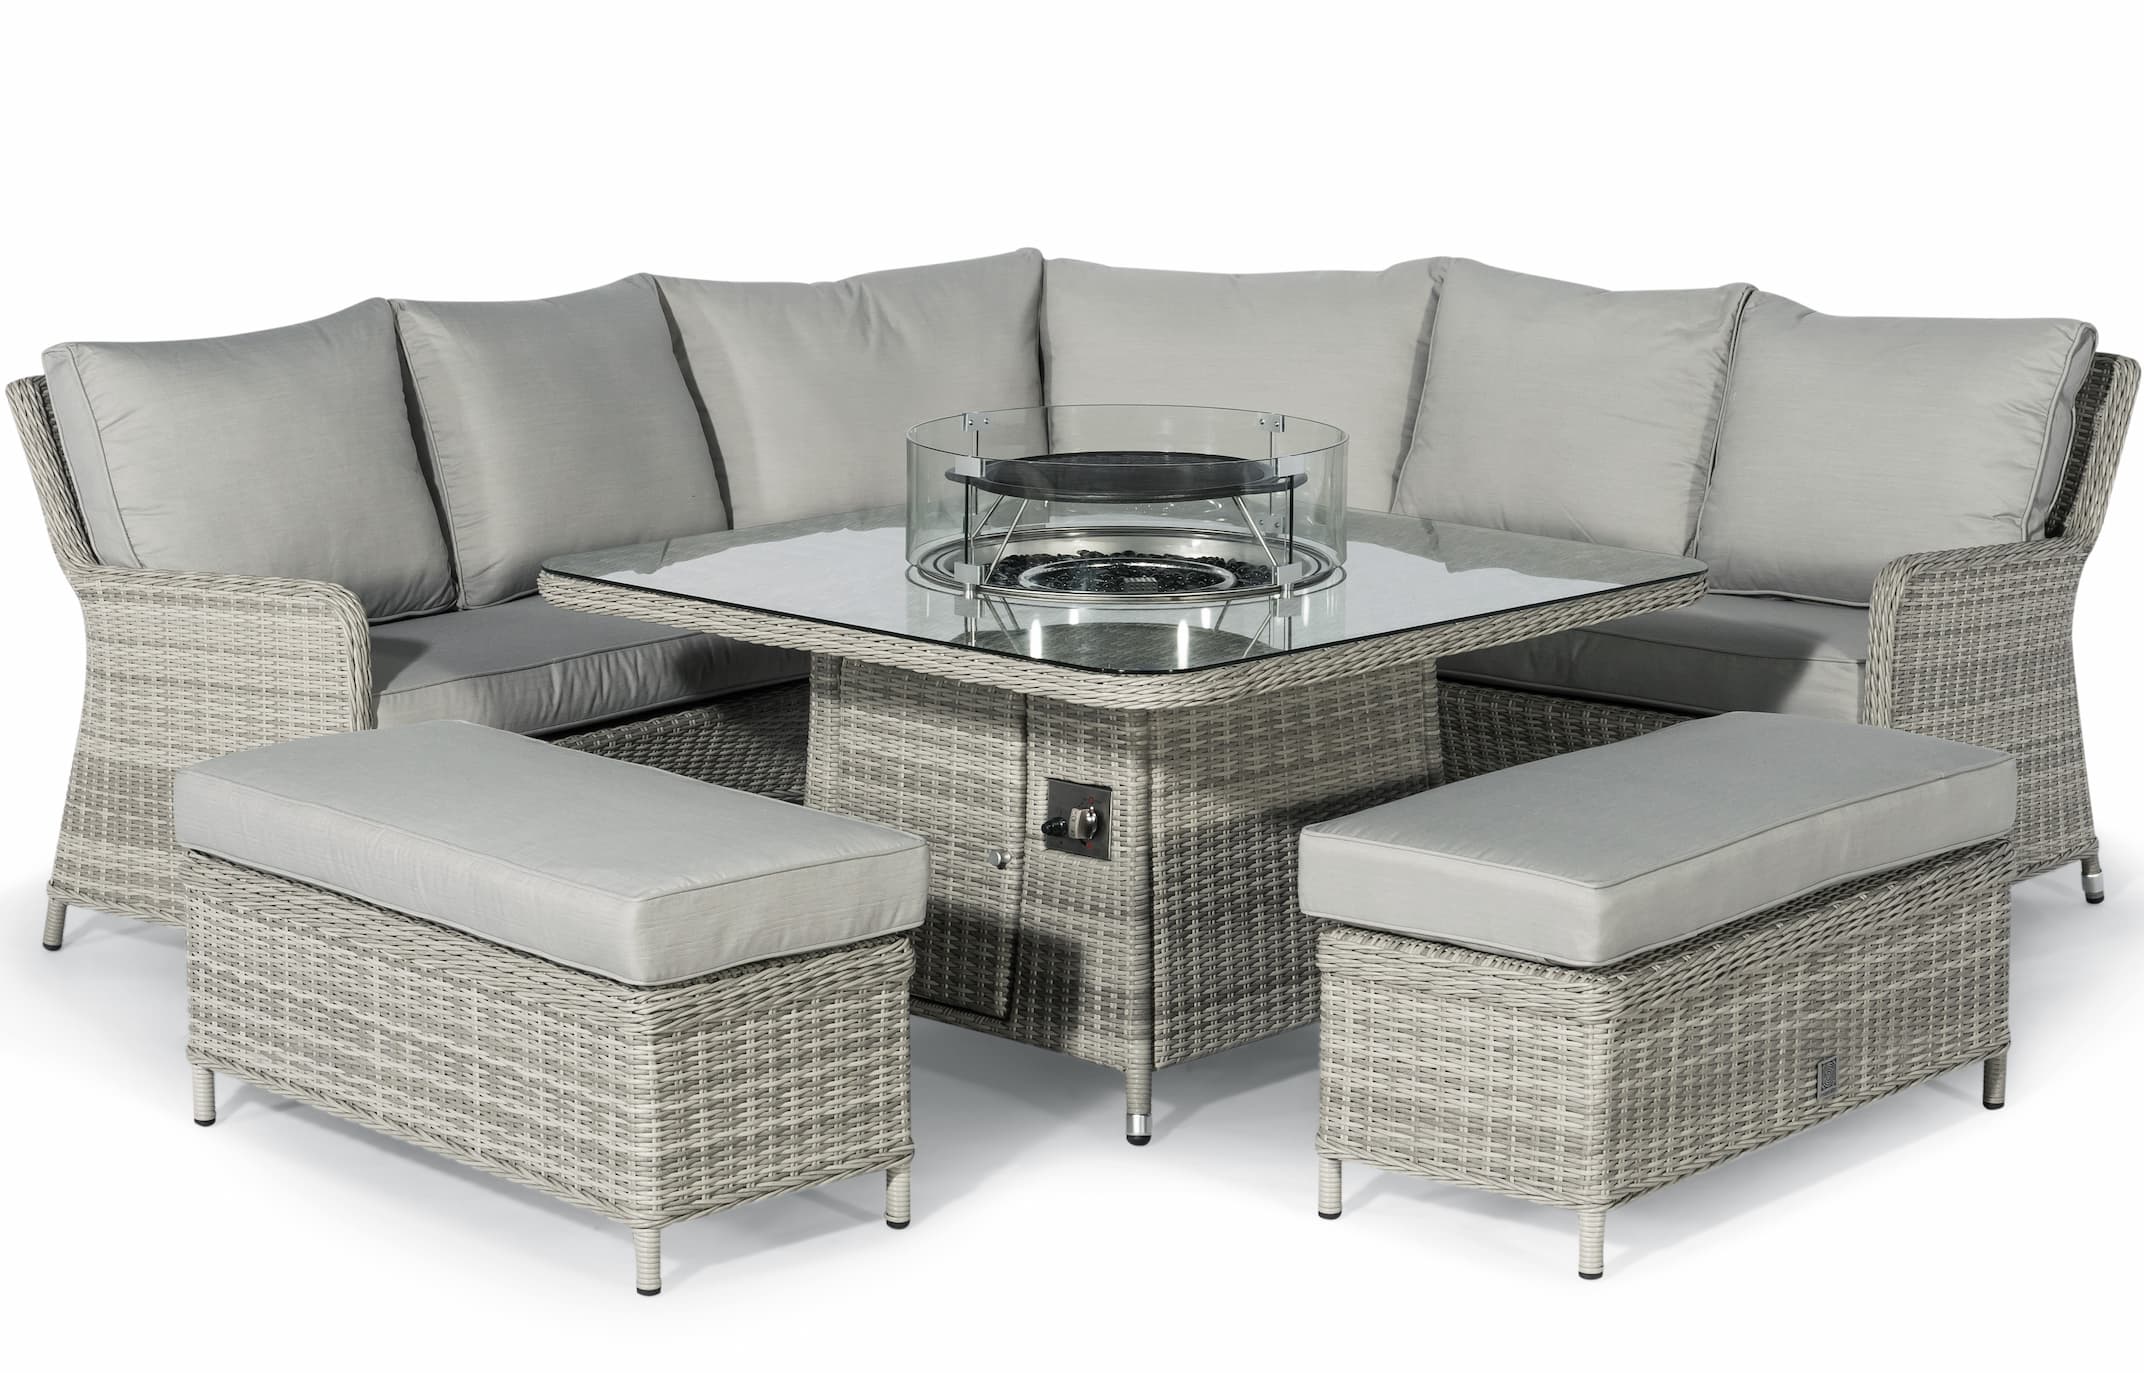 Royal Corner Garden Furniture Set With, Outside Furniture With Fire Pit